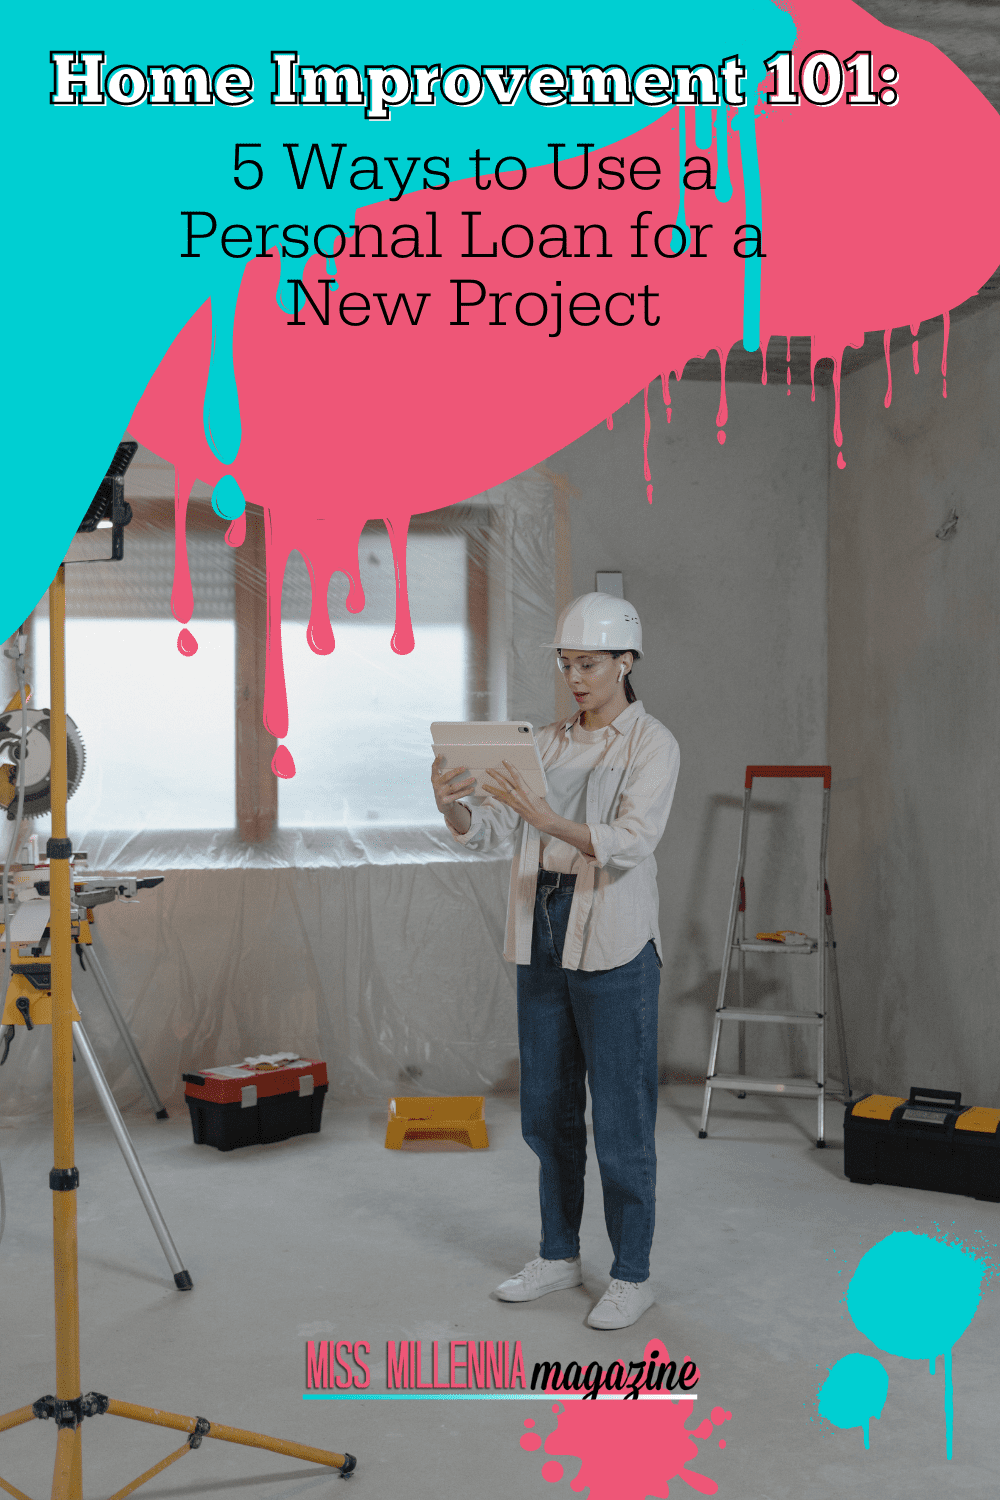 Home Improvement 101: 5 Ways to Use a Personal Loan for a New Project